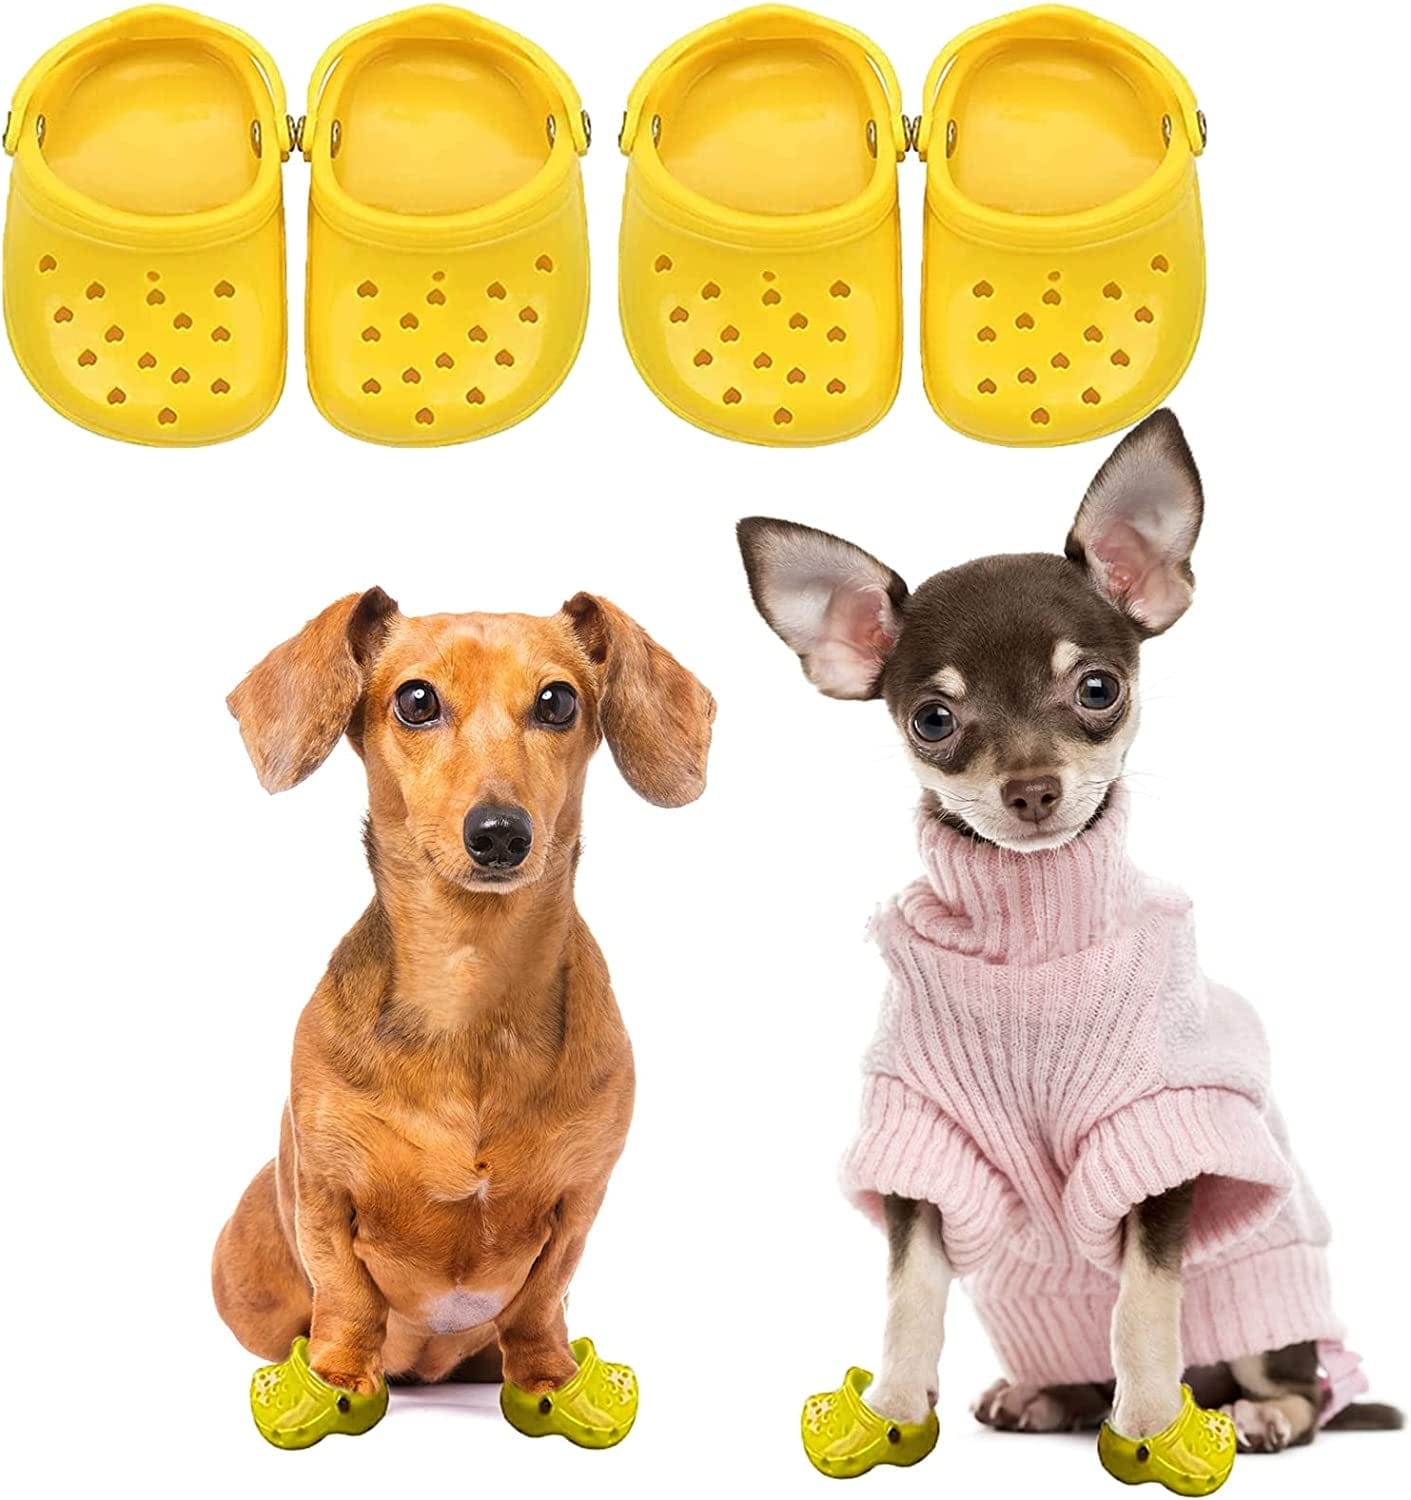 TiKToK Cute Cat Crocs Candy Color Cat Sandals Only for Cats, Pet Decorative  Crocs for Small Cats and Dogs Photo Shoot : Pet Supplies 